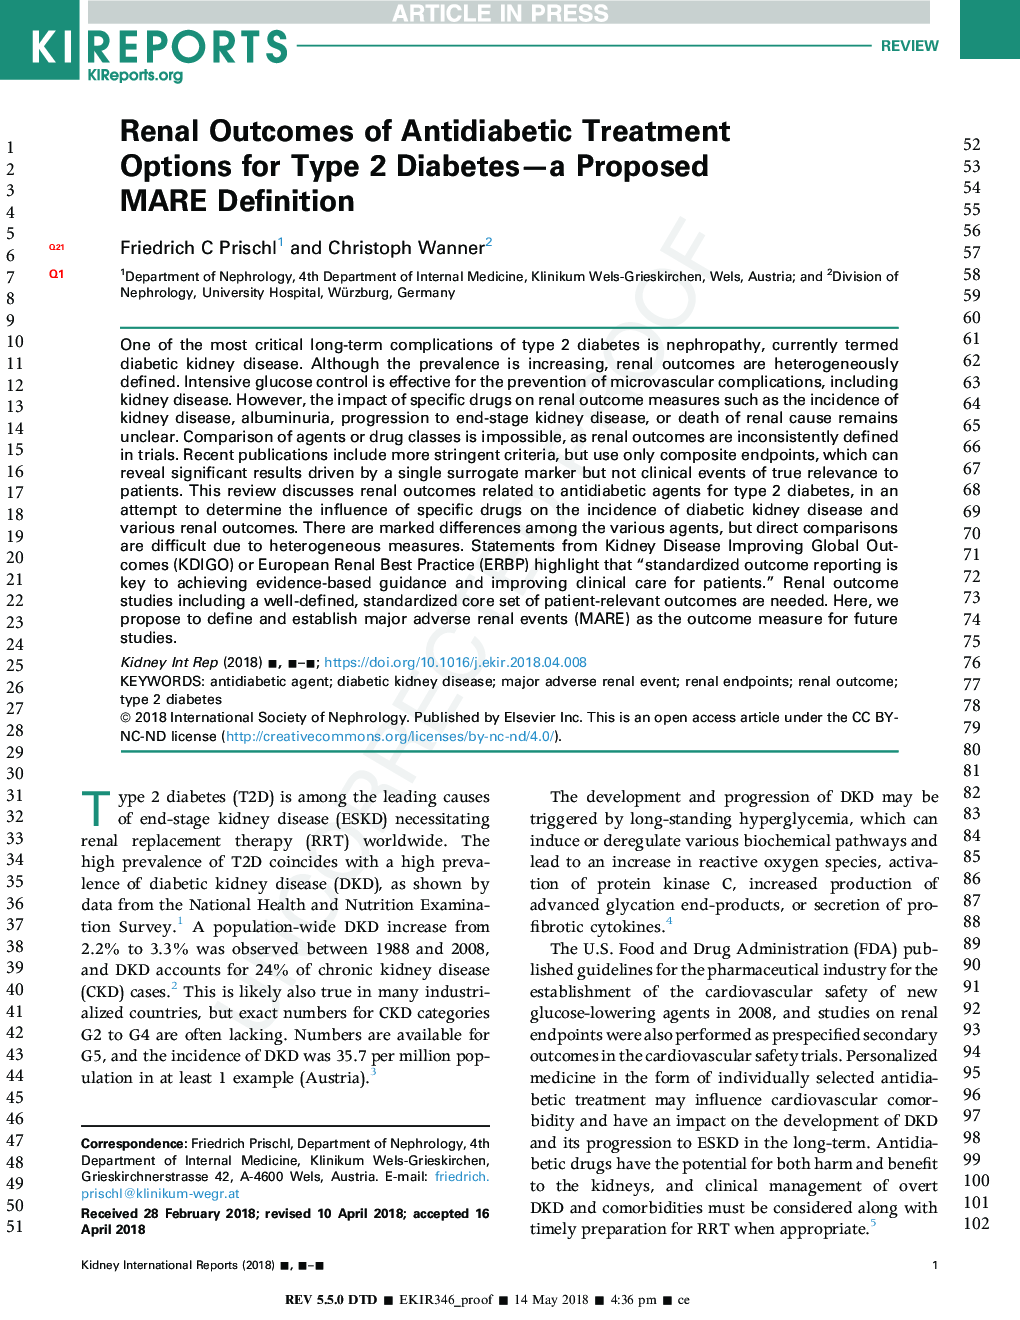 Renal Outcomes of Antidiabetic Treatment Options for Type 2 Diabetes-A Proposed MARE Definition